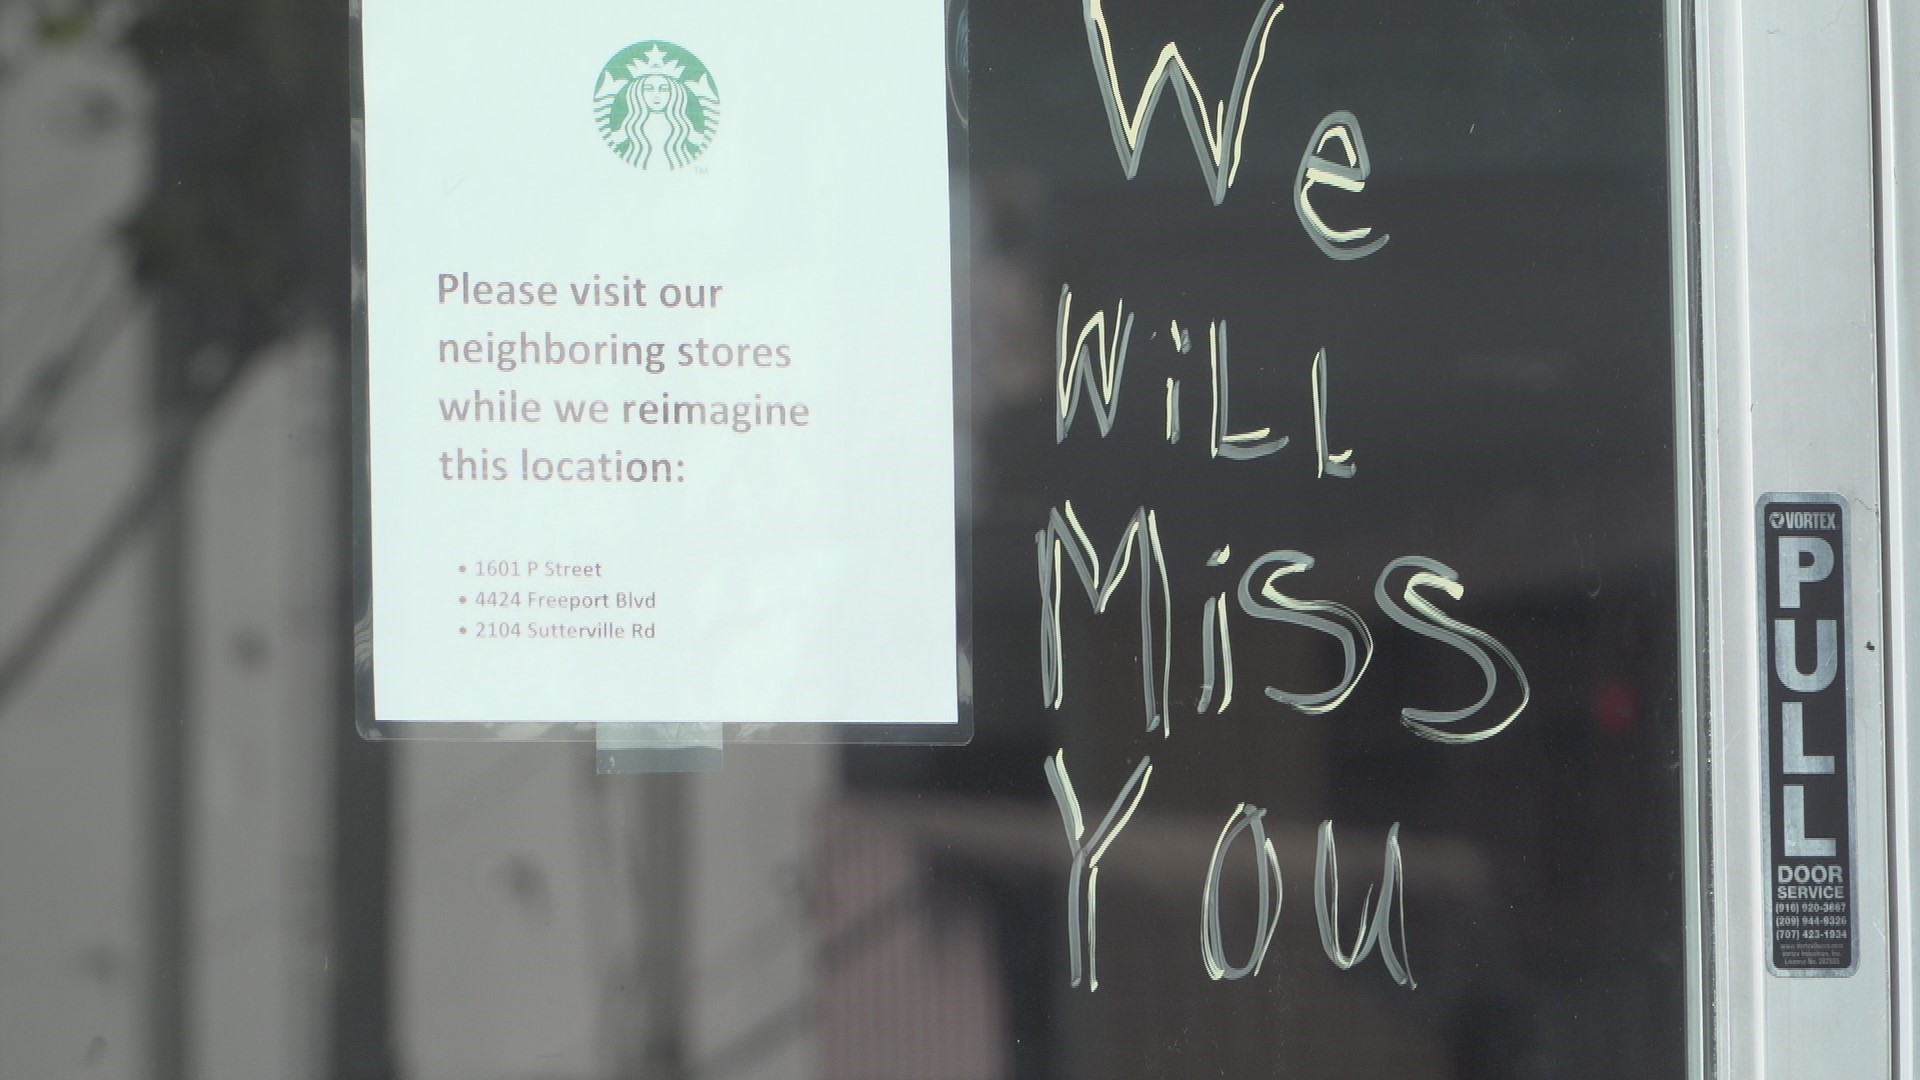 When Starbucks closed its shop on Broadway citing safety concerns, council member Valenzuela encouraged neighbors to also call county